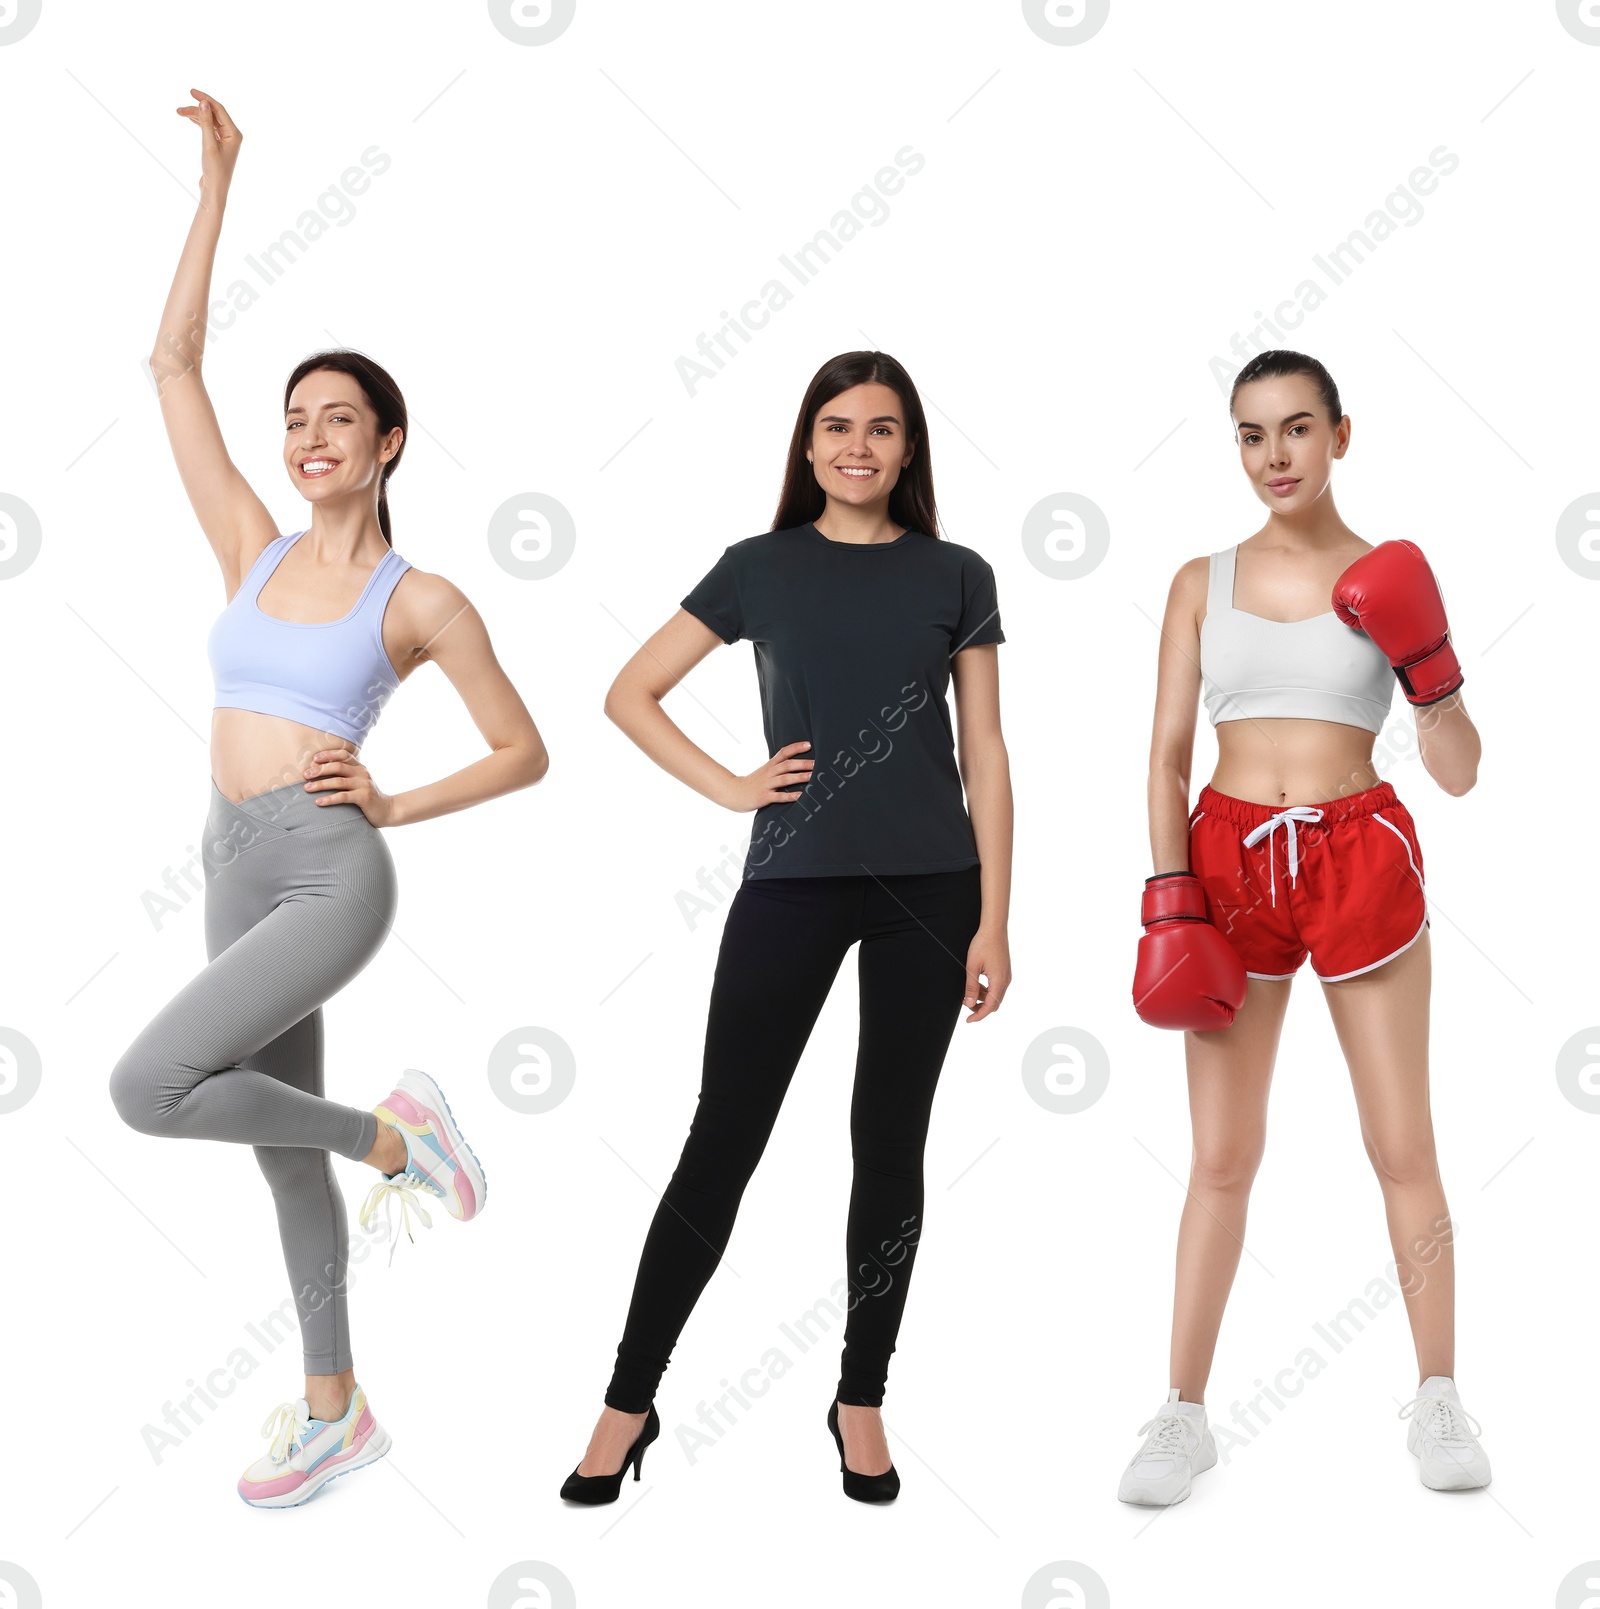 Image of Group of different women on white background